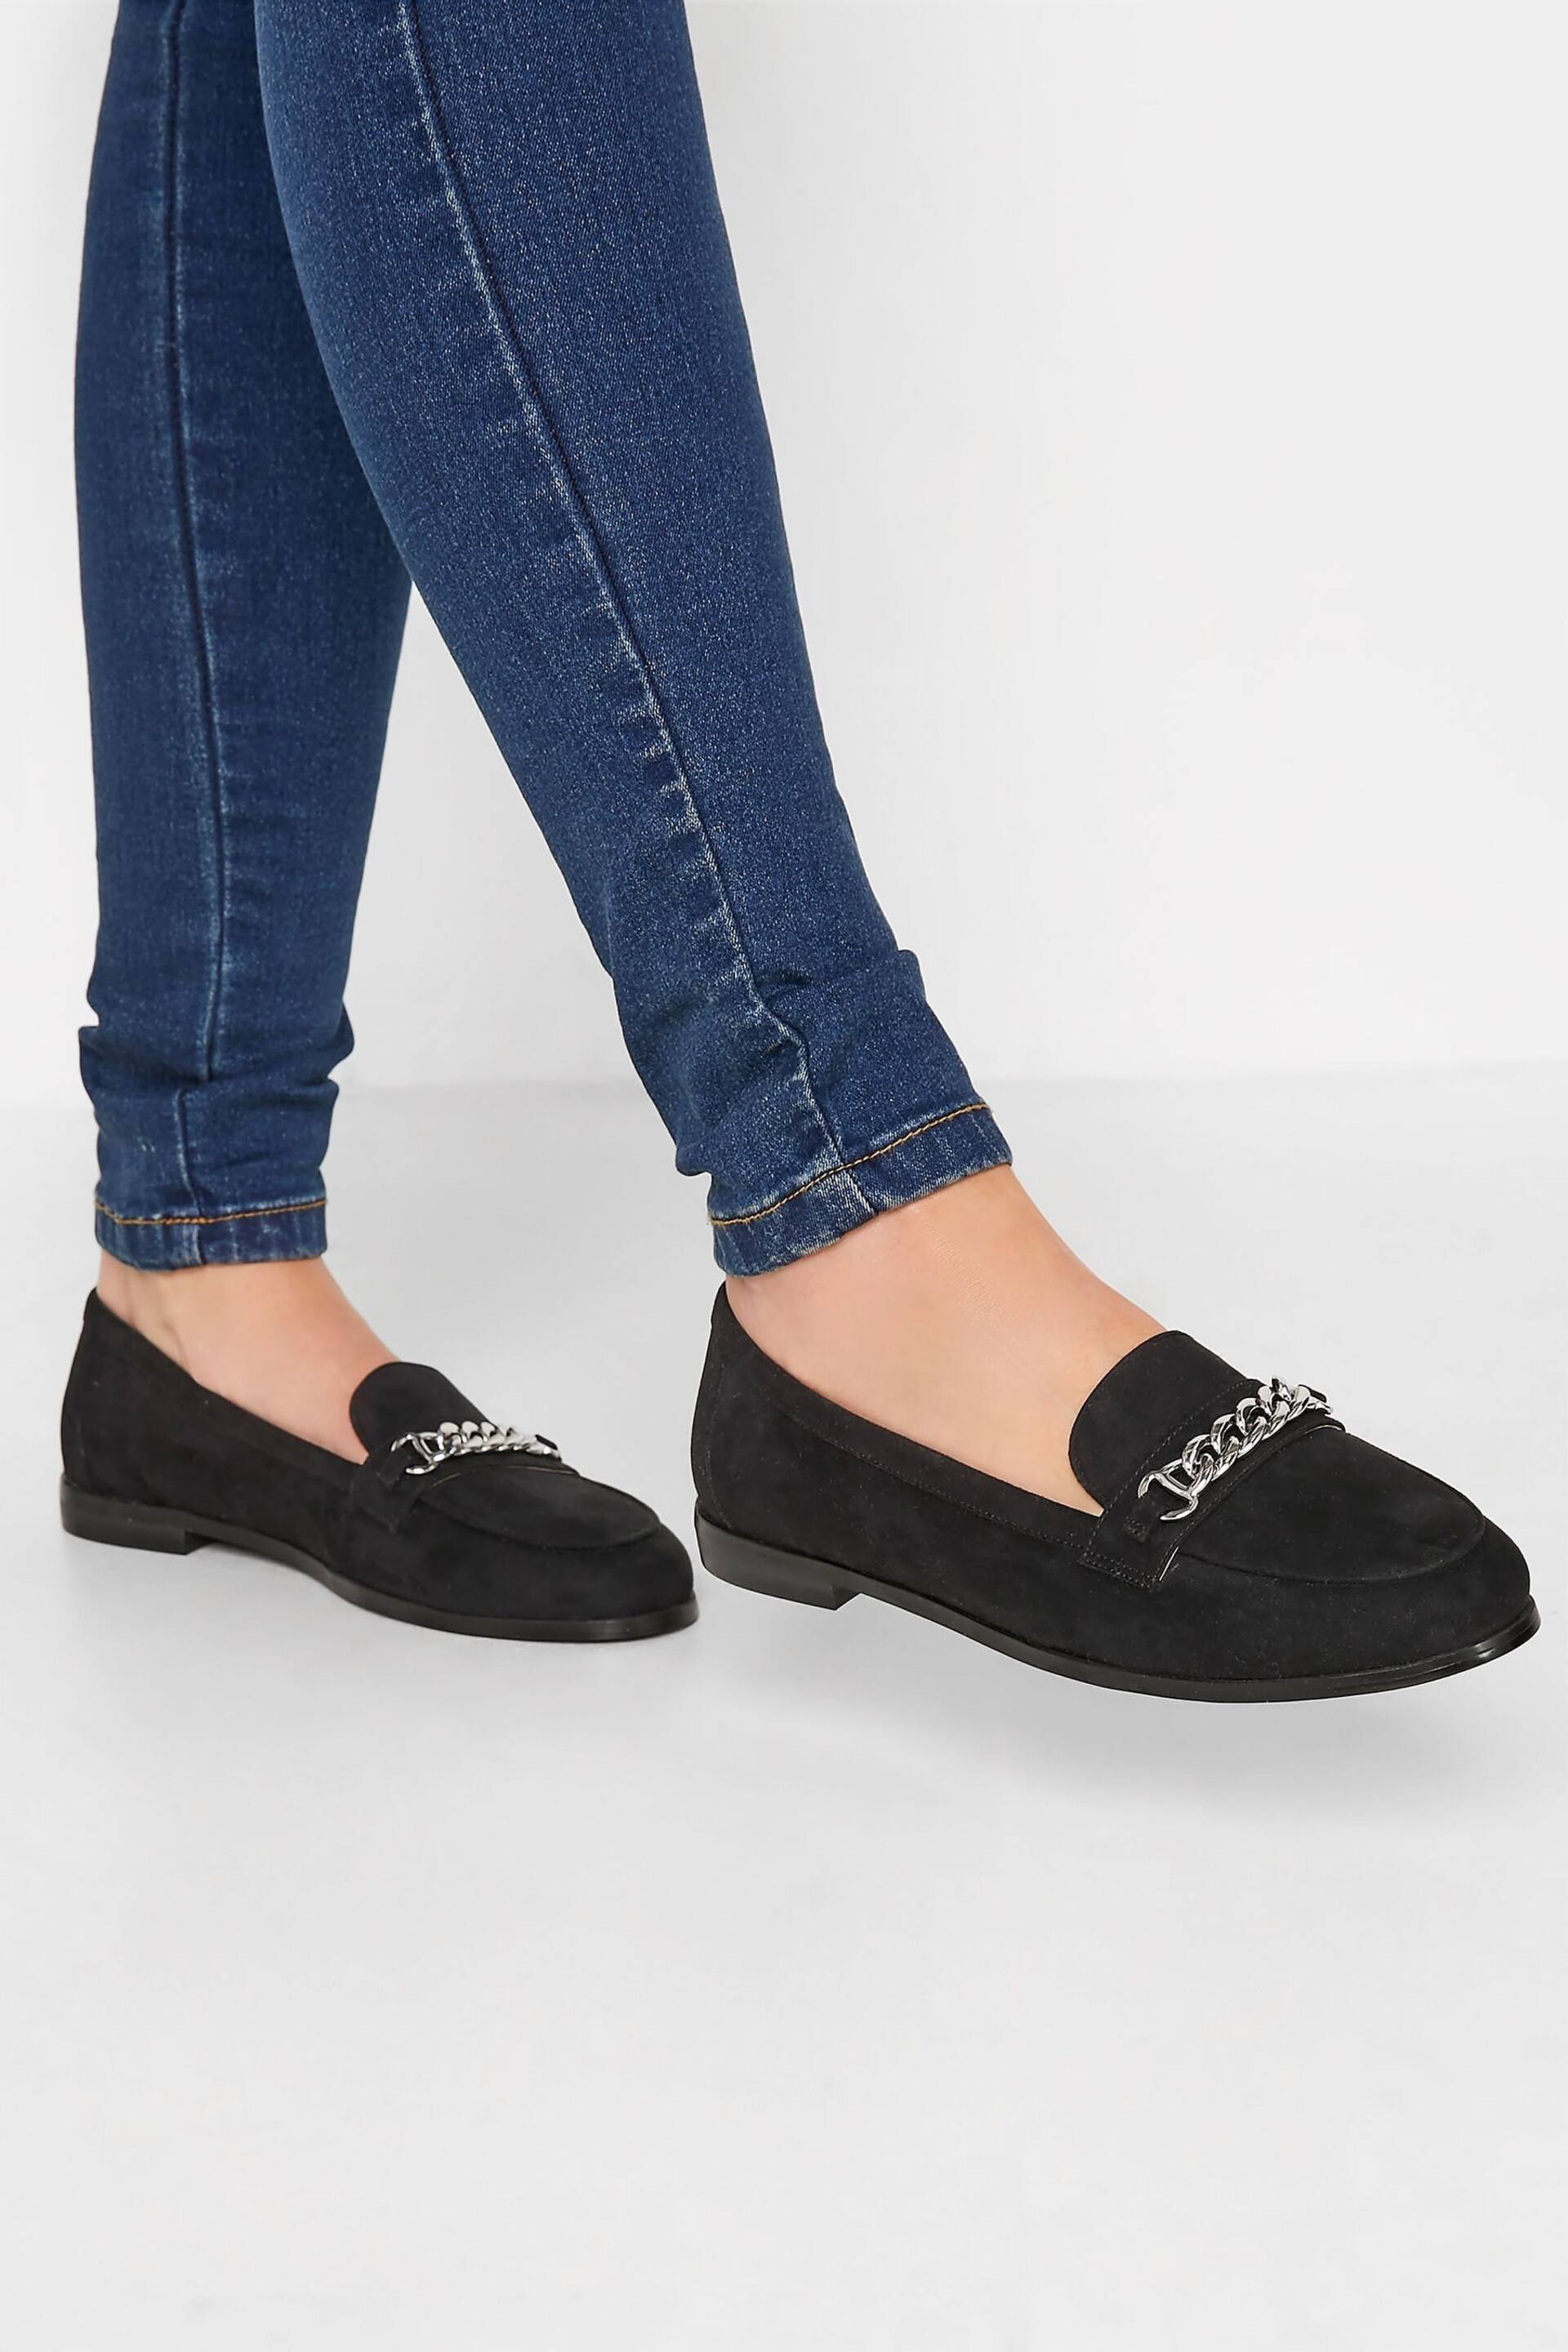 Long Tall Sally Black Chain Loafers - Image 1 of 5